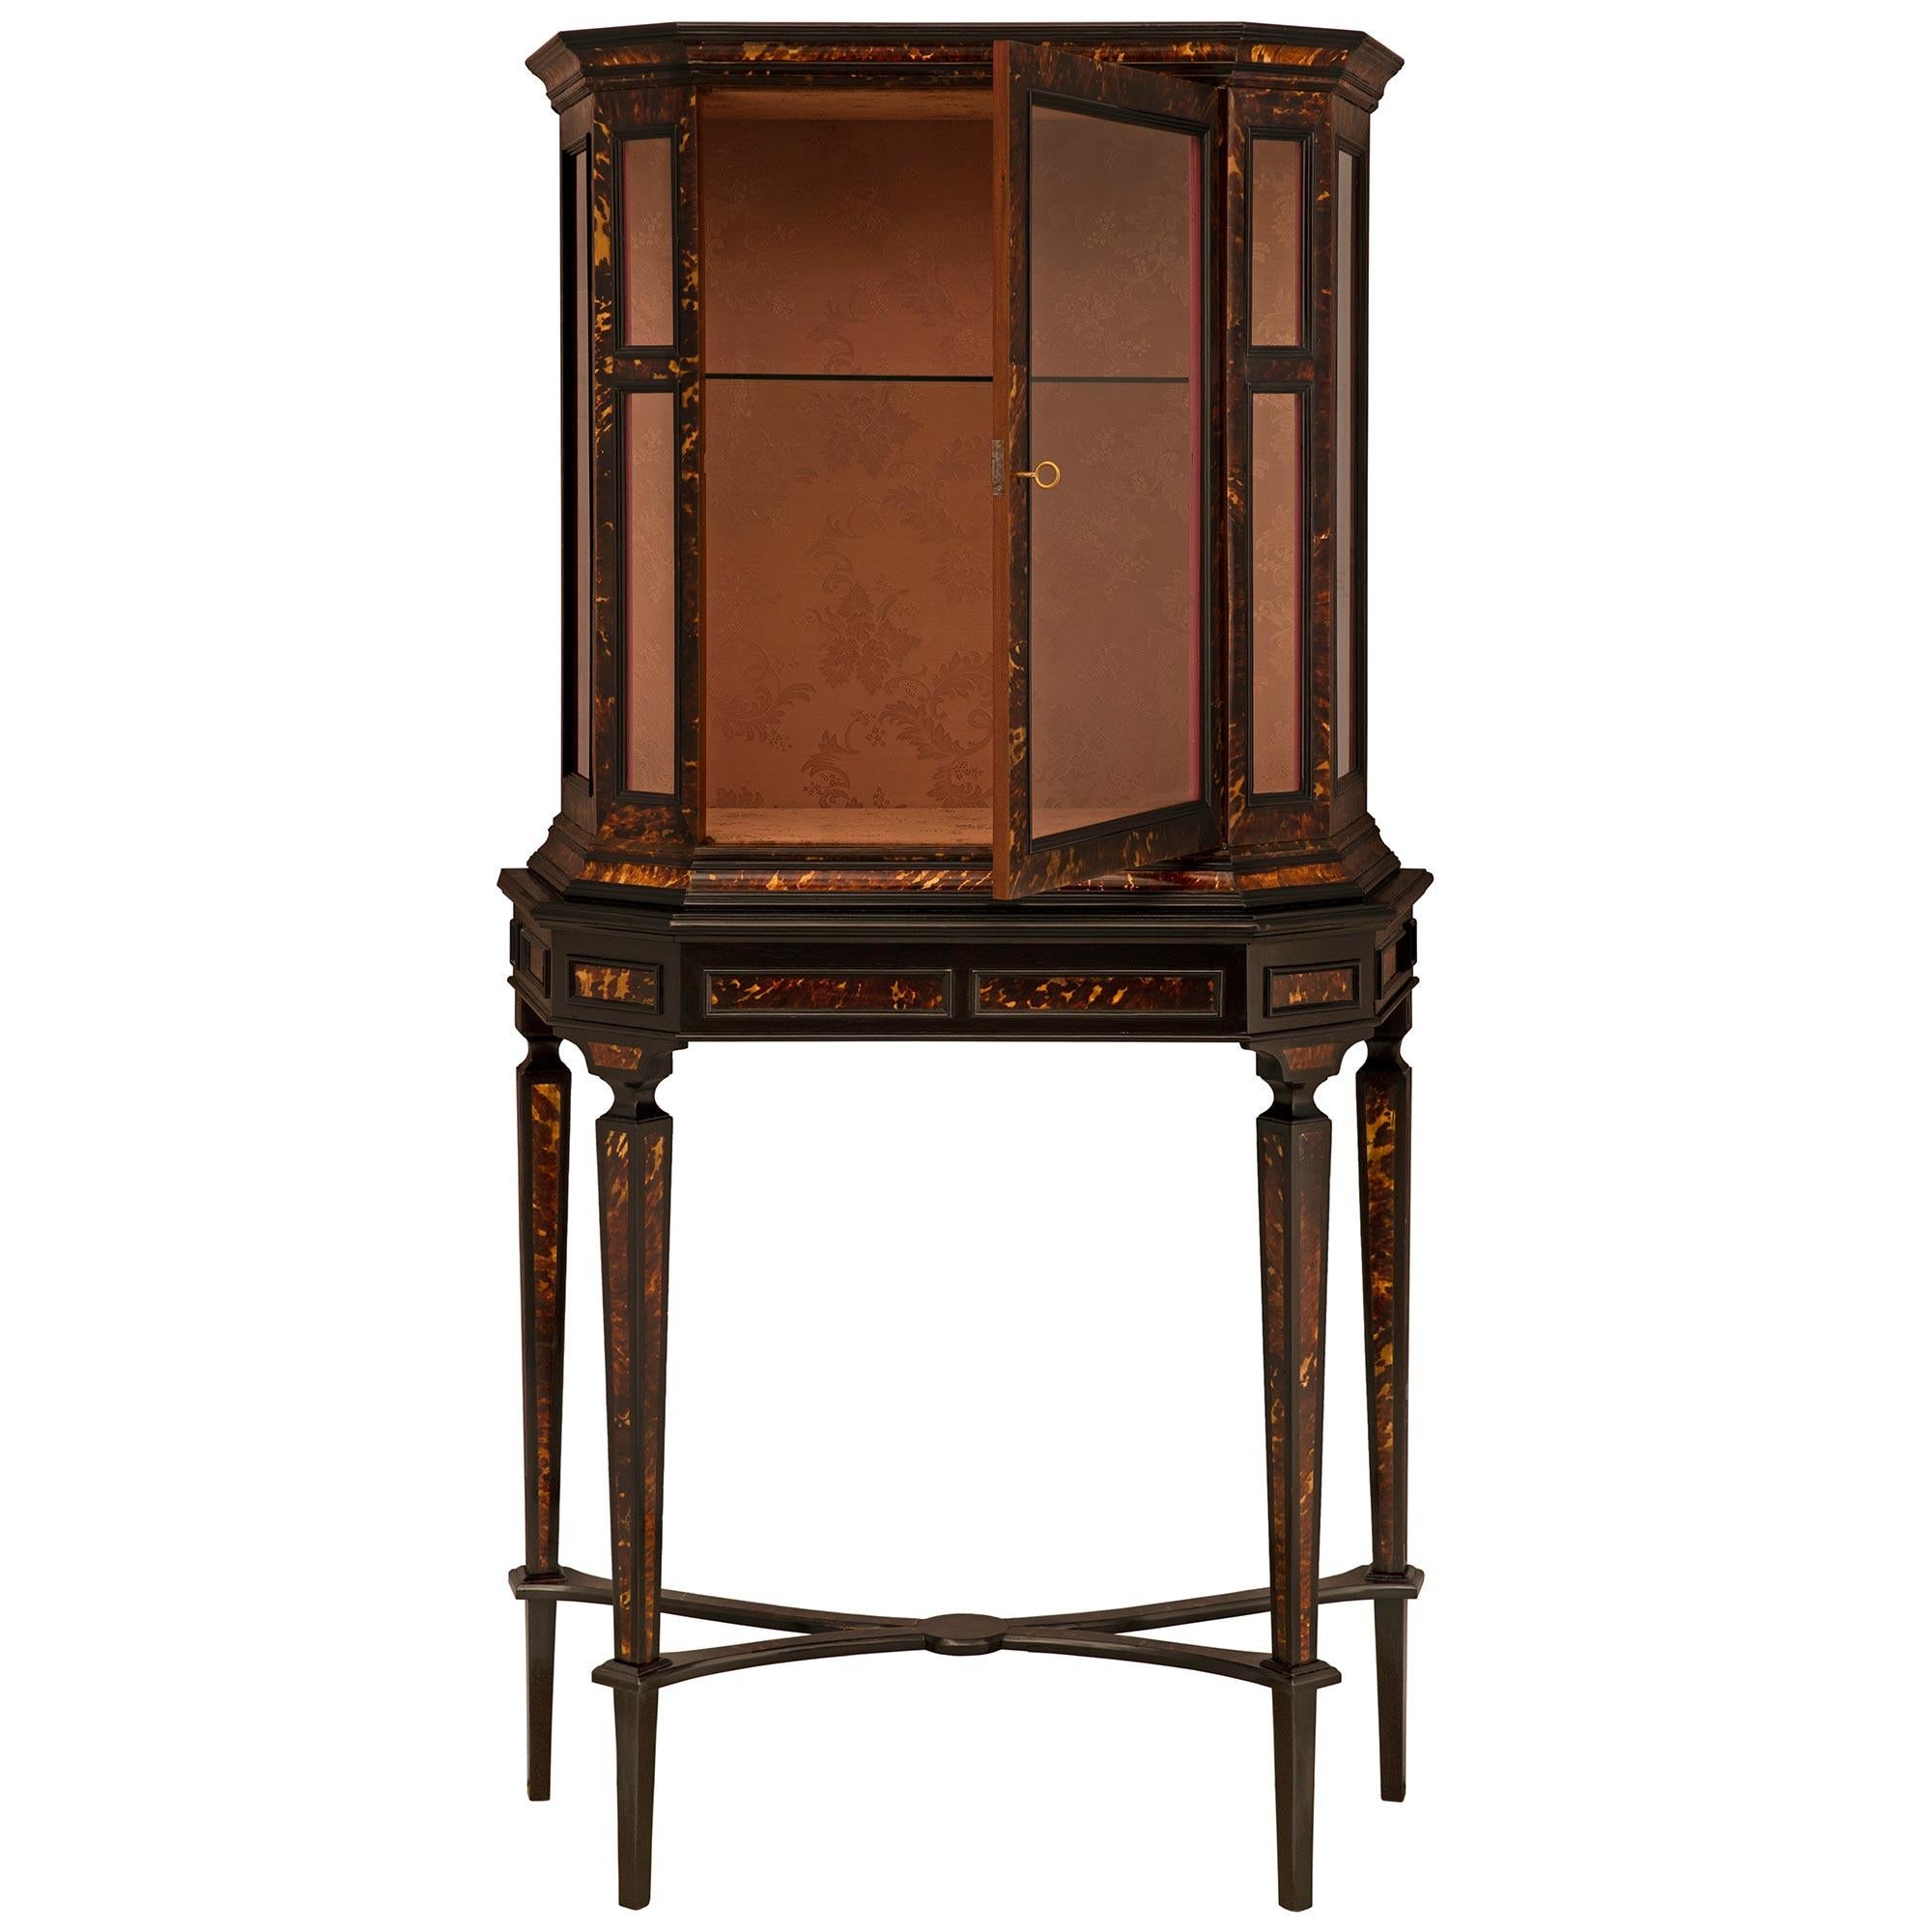 A very handsome and elegant Continental 19th century ebonized Fruitwood and Tortoiseshell cabinet vitrine. This beautiful freestanding vitrine is raised by four slender square tapered legs decorated by Tortoiseshell on all sides. Each leg is